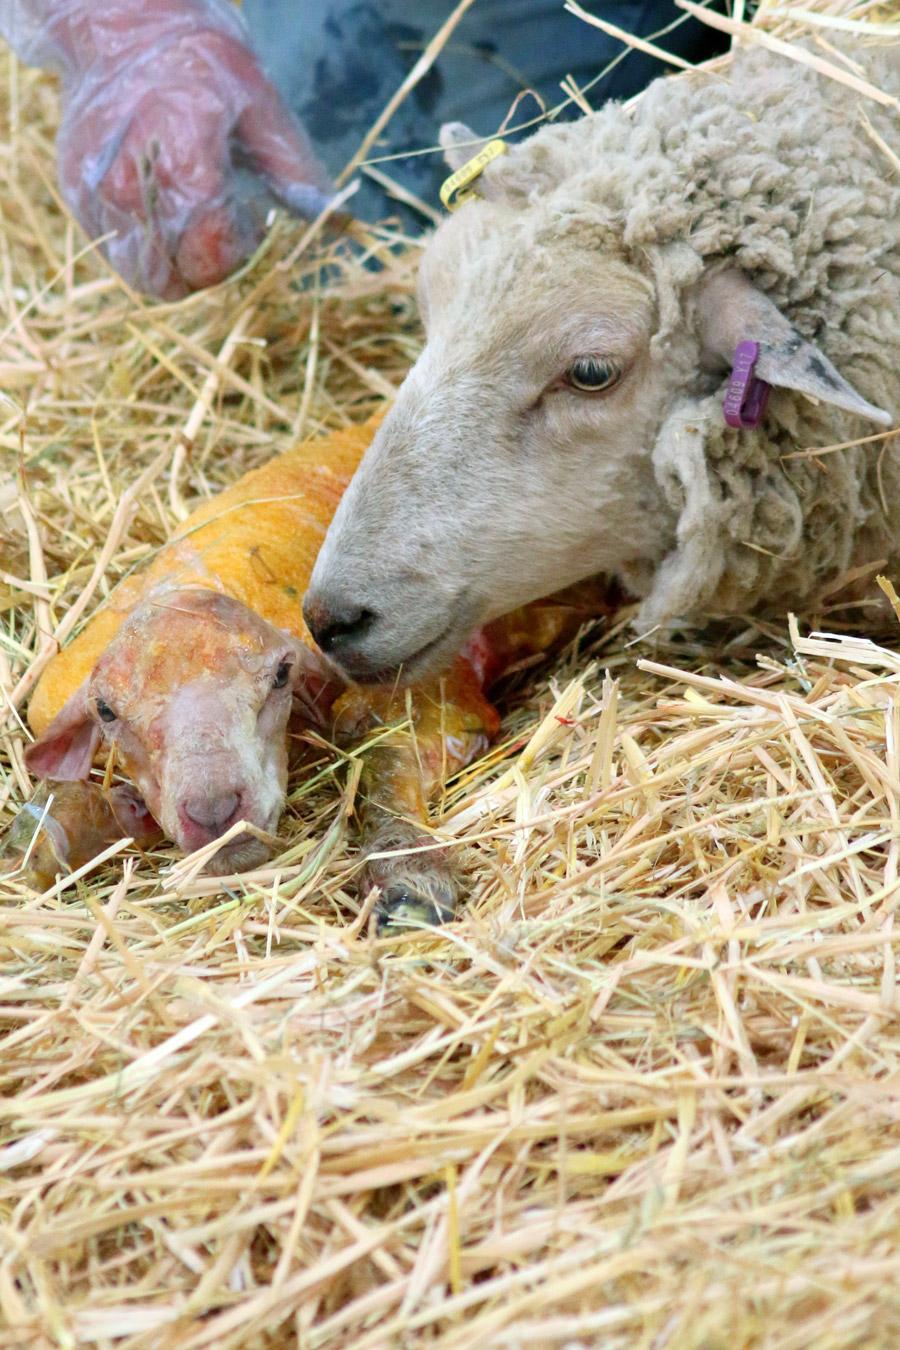 Sheep birth - Photo by Mat Brown from Pexels